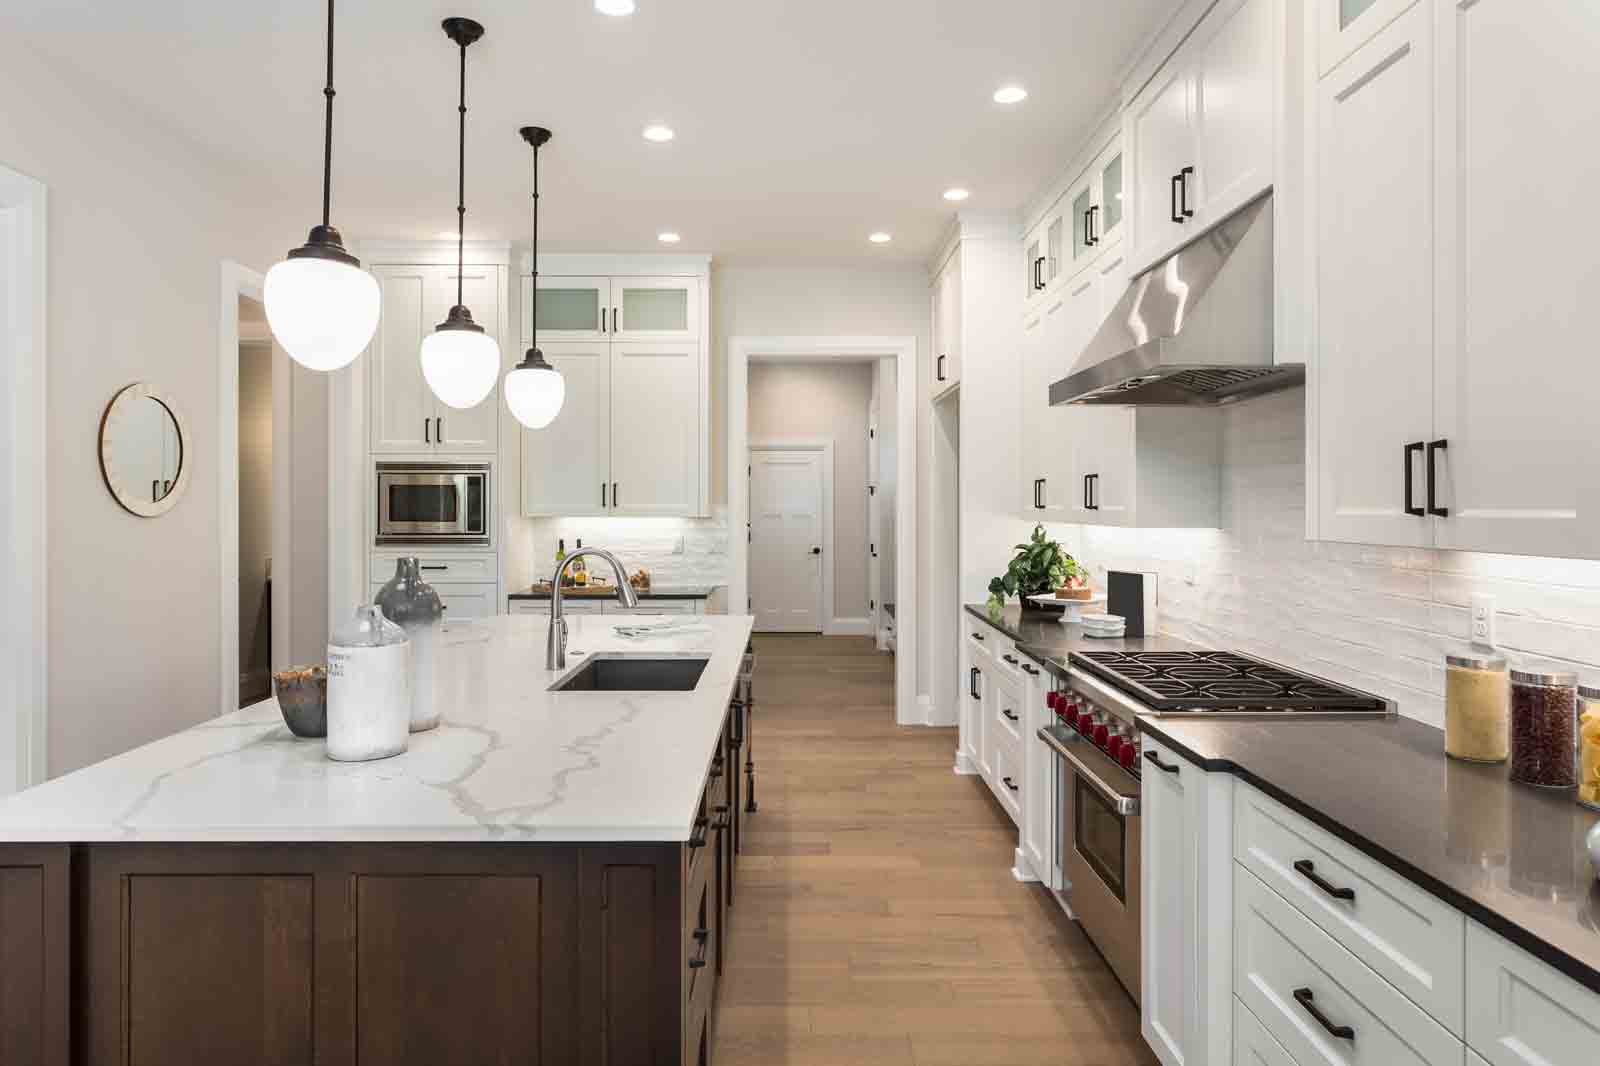 Lars San Diego Kitchen Remodeling Company in Lakeside